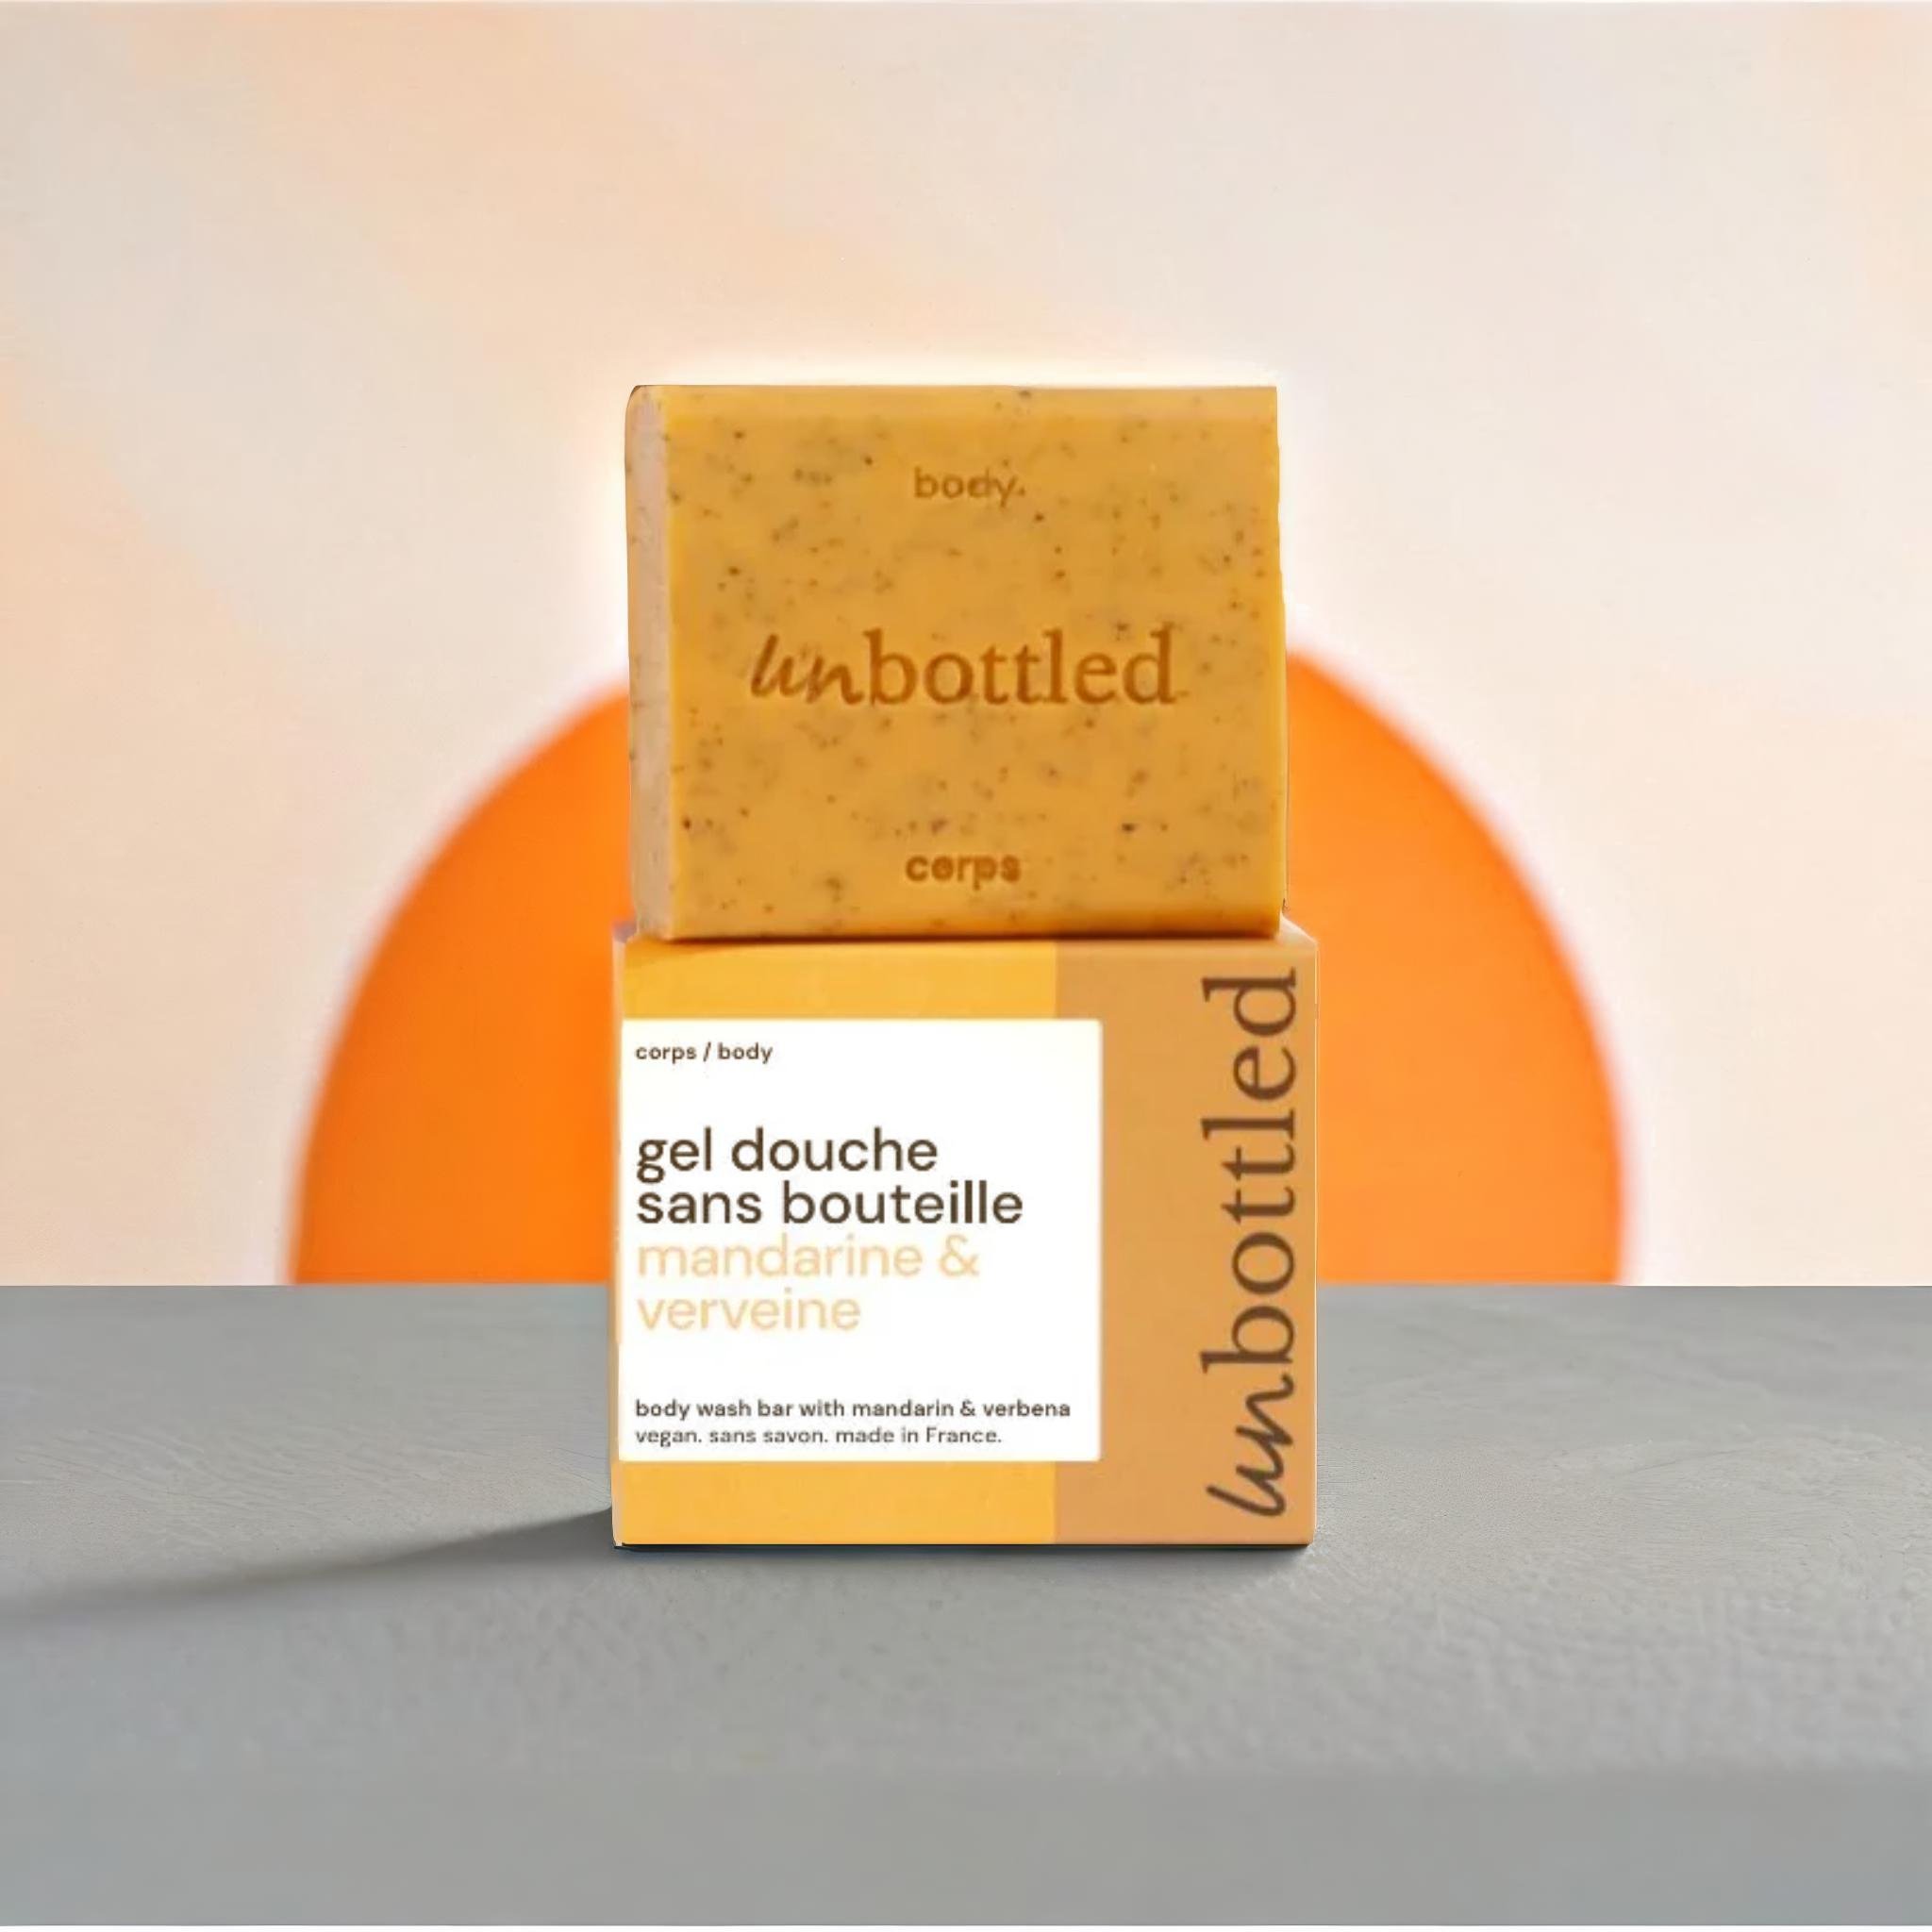 A product standing on a gray table, sun on an orange wall in the background